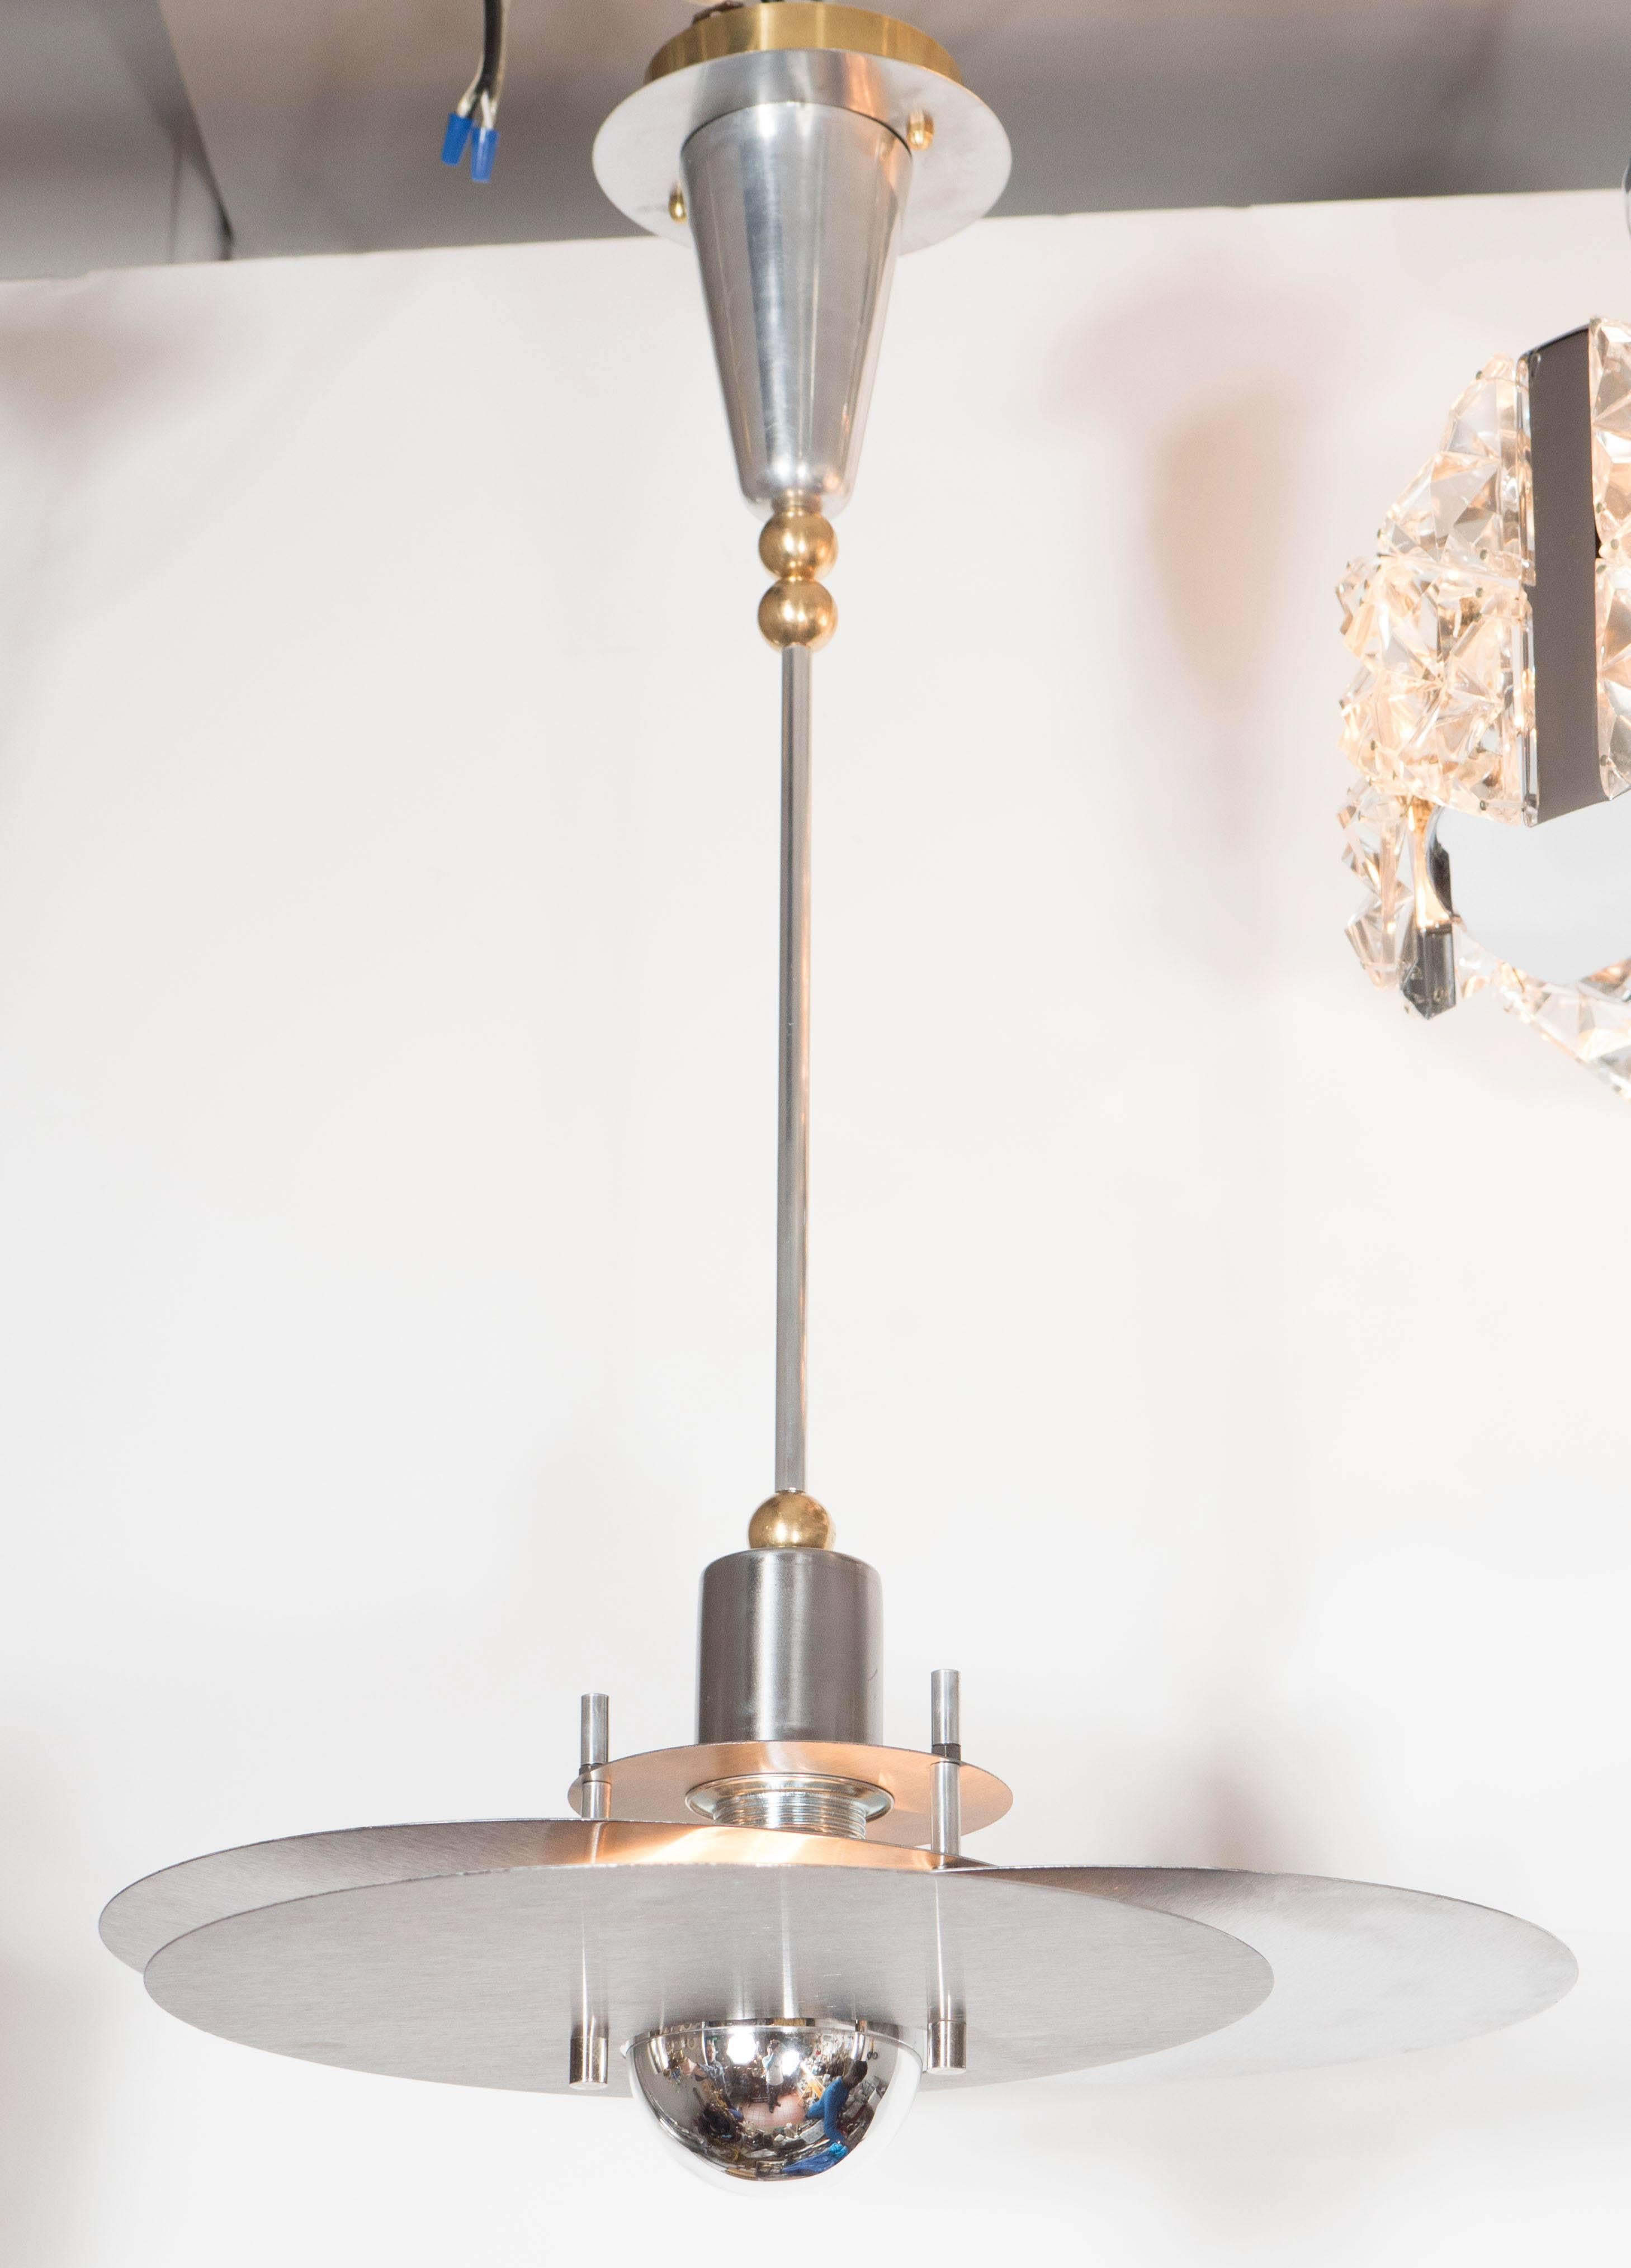 This sculptural Mid-Century Modernist chandelier consists of circular polished aluminum geometric elements configured in a stacked over-lapping fashion. Suspended by a rod with brass ball adornments and a conical shaped canopy. Newly rewired and